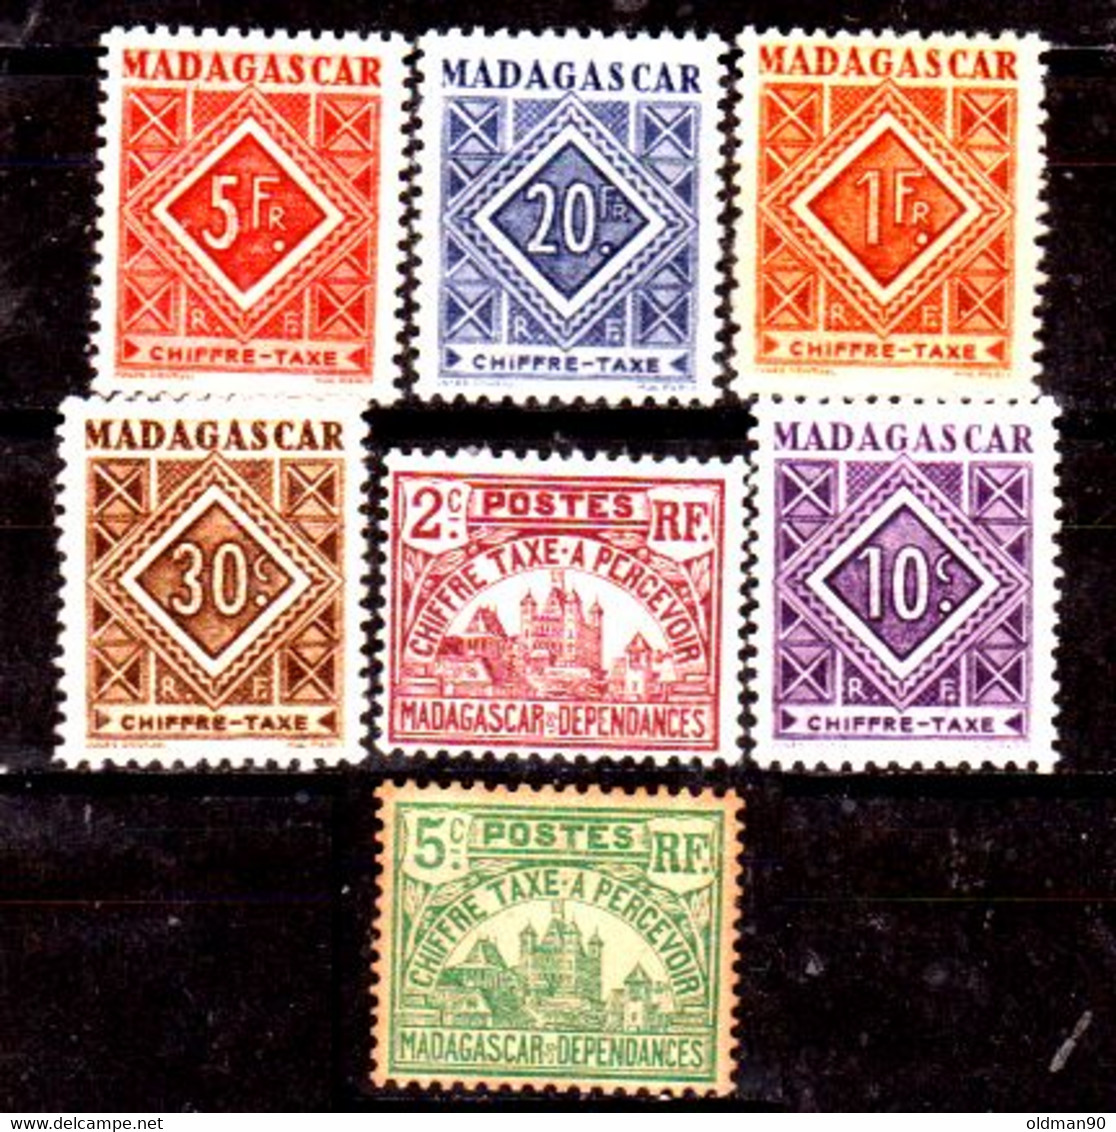 Madagascar -137- POSTAGE DUE STAMPS, Issued By 1908-1962 - Quality In Your Opinion. - Postage Due